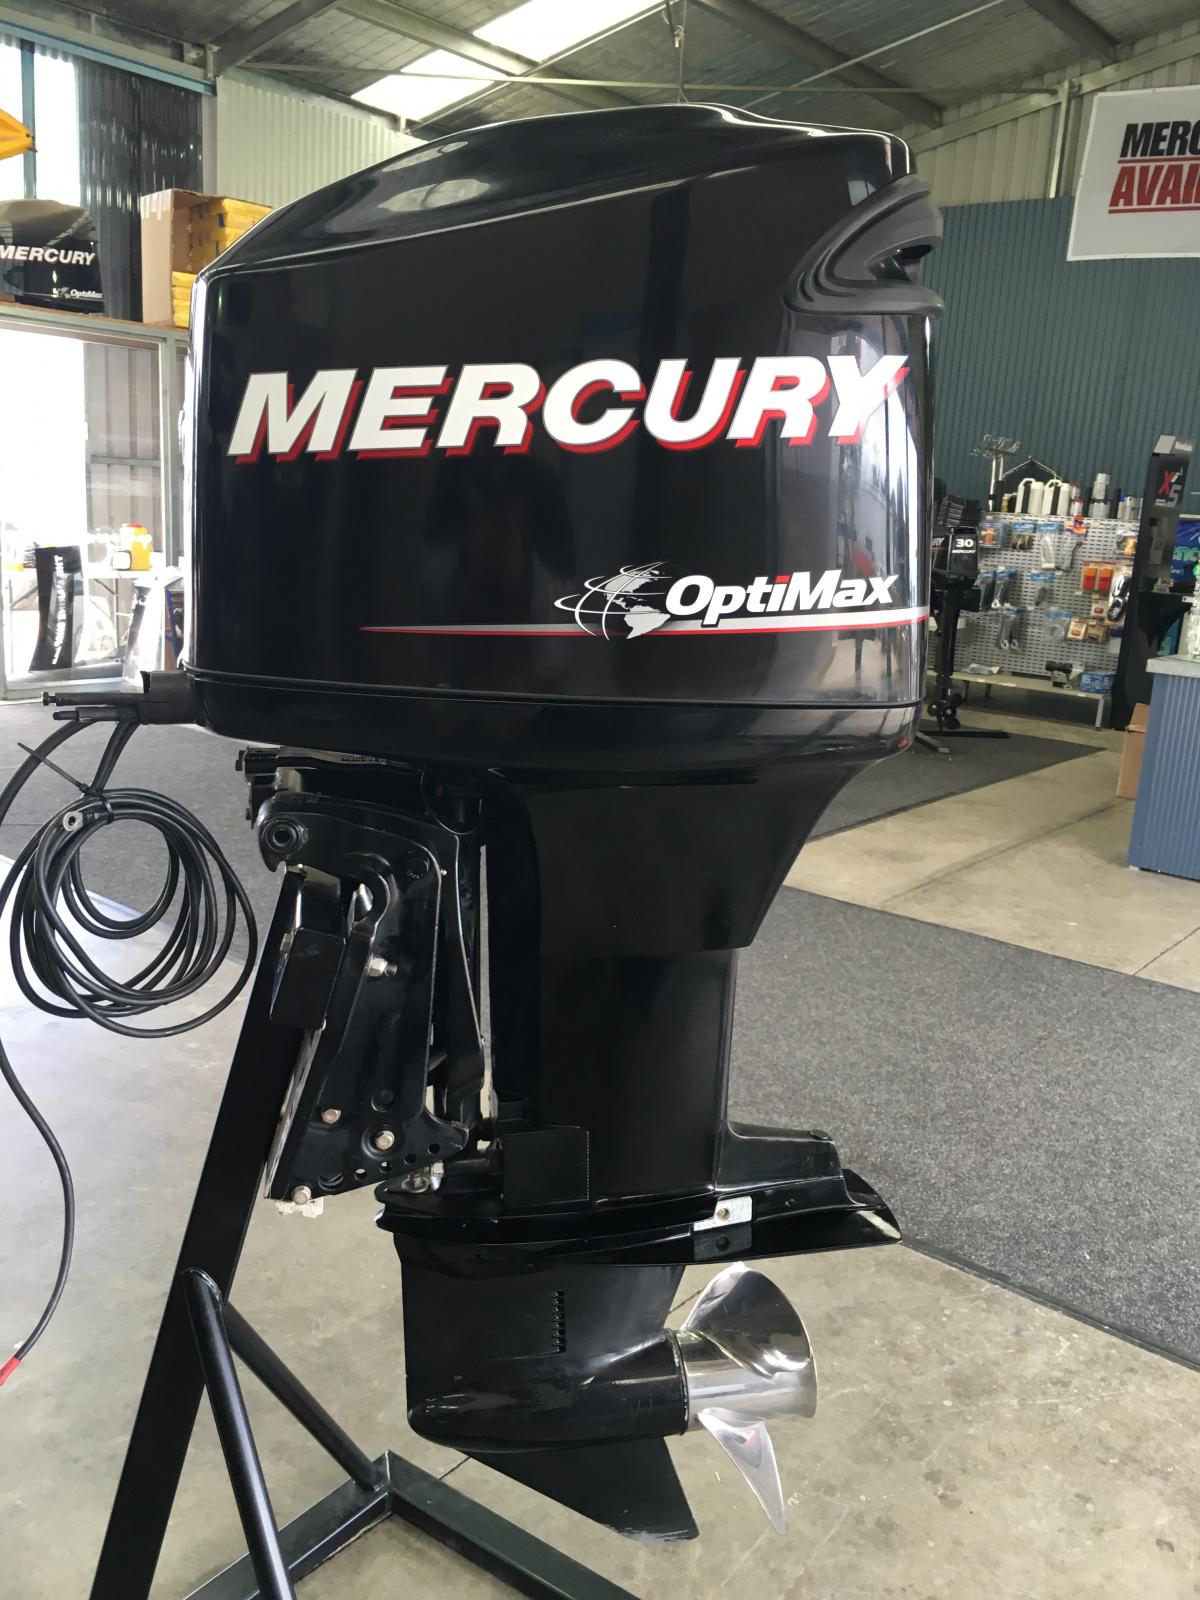 Mercury 135 L Optimax 2009 For Sale | Boats for Sale on Boat Deck